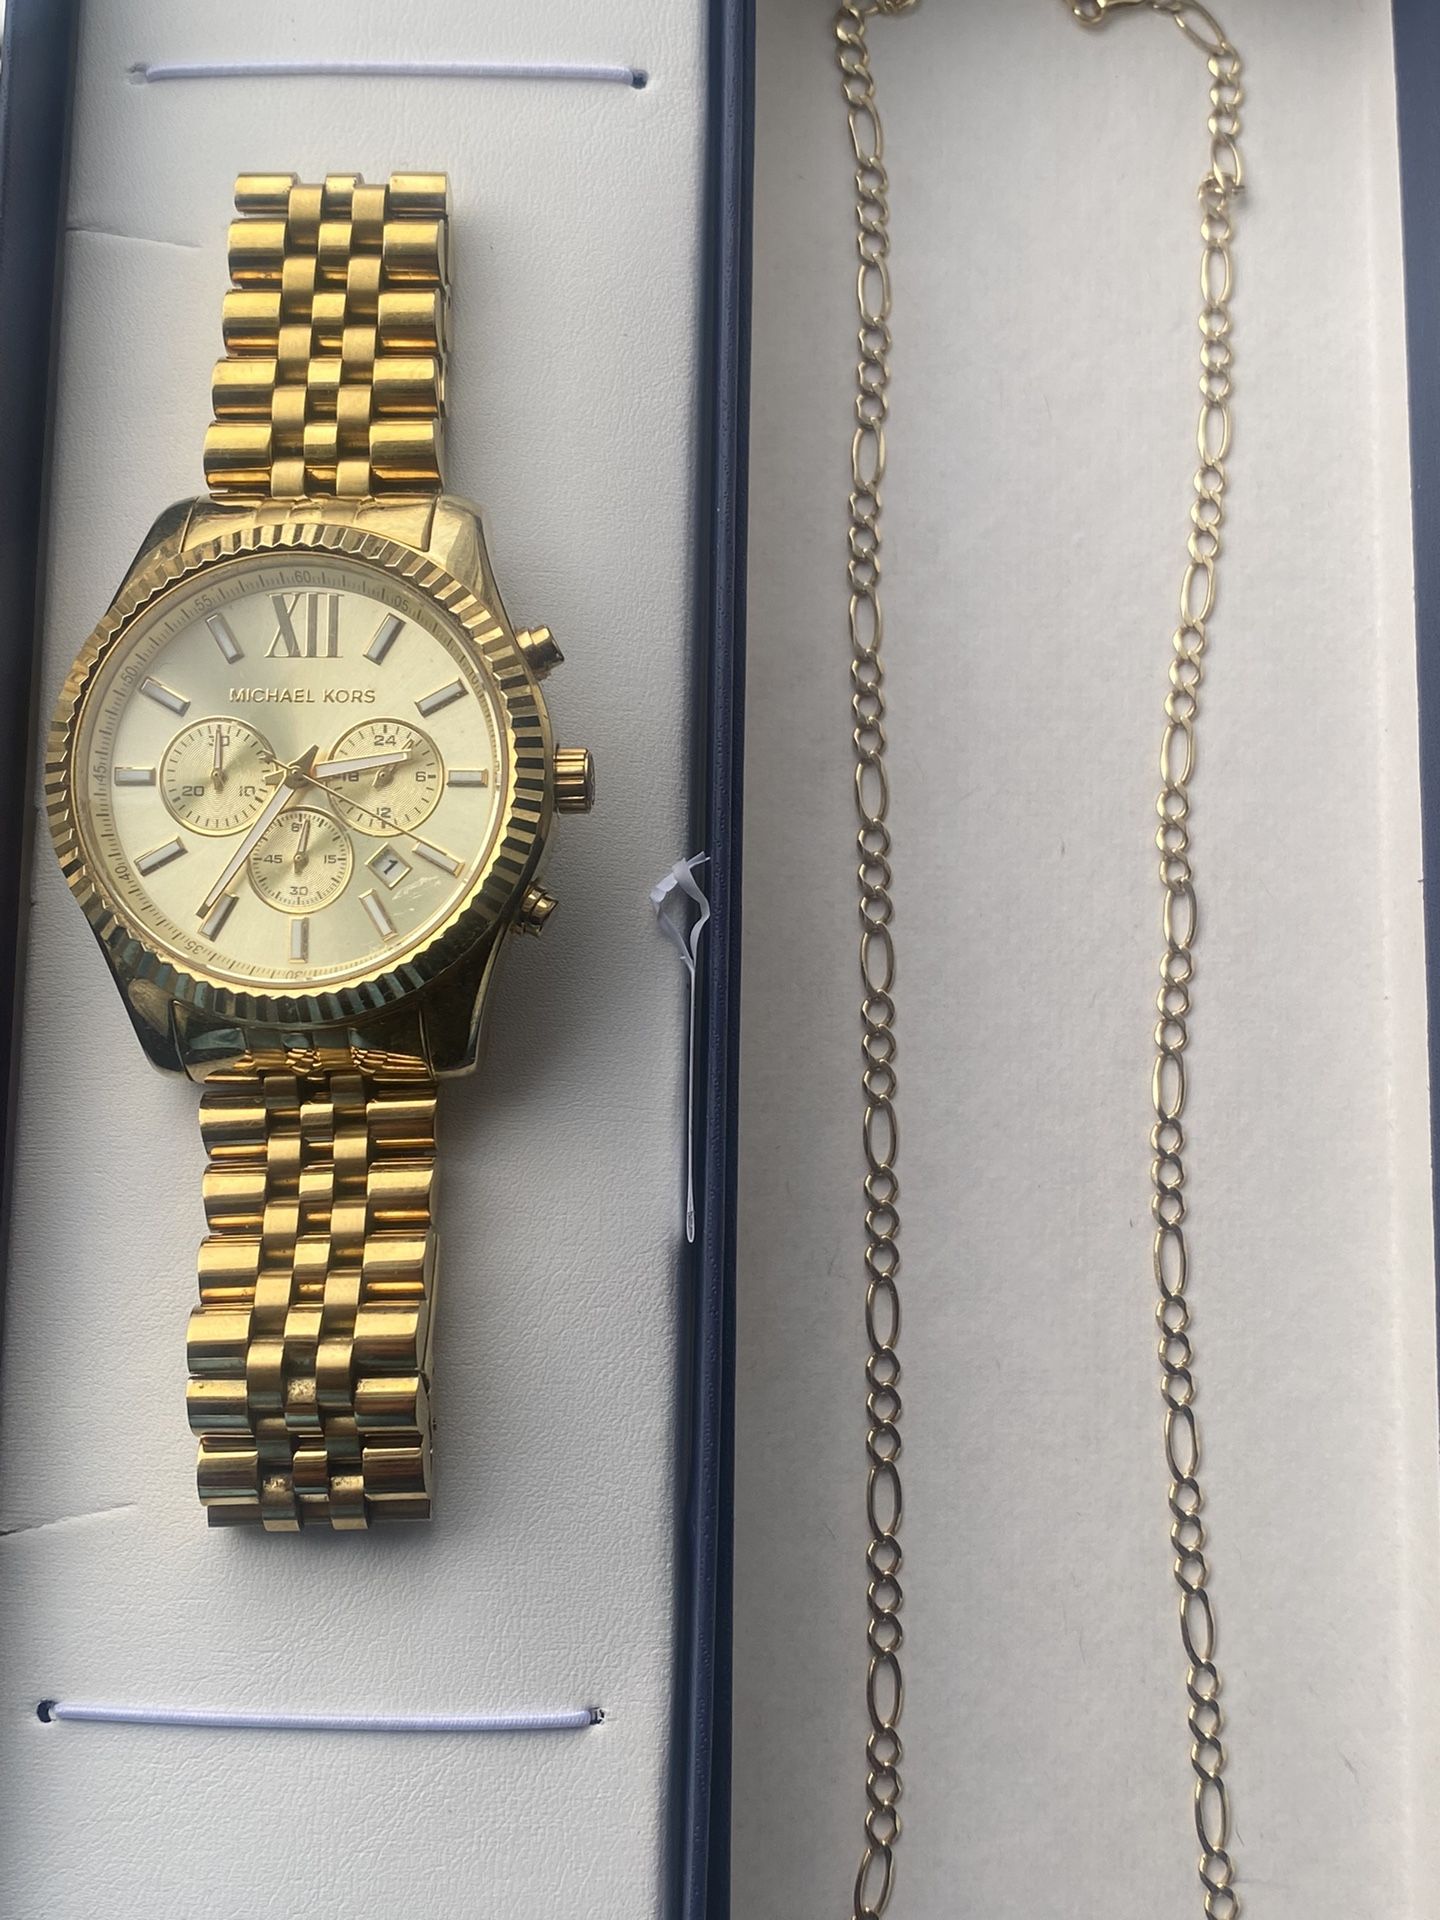 Gold Men Michael Kors Watch , Gold Chain for Sale in Chicago, IL - OfferUp